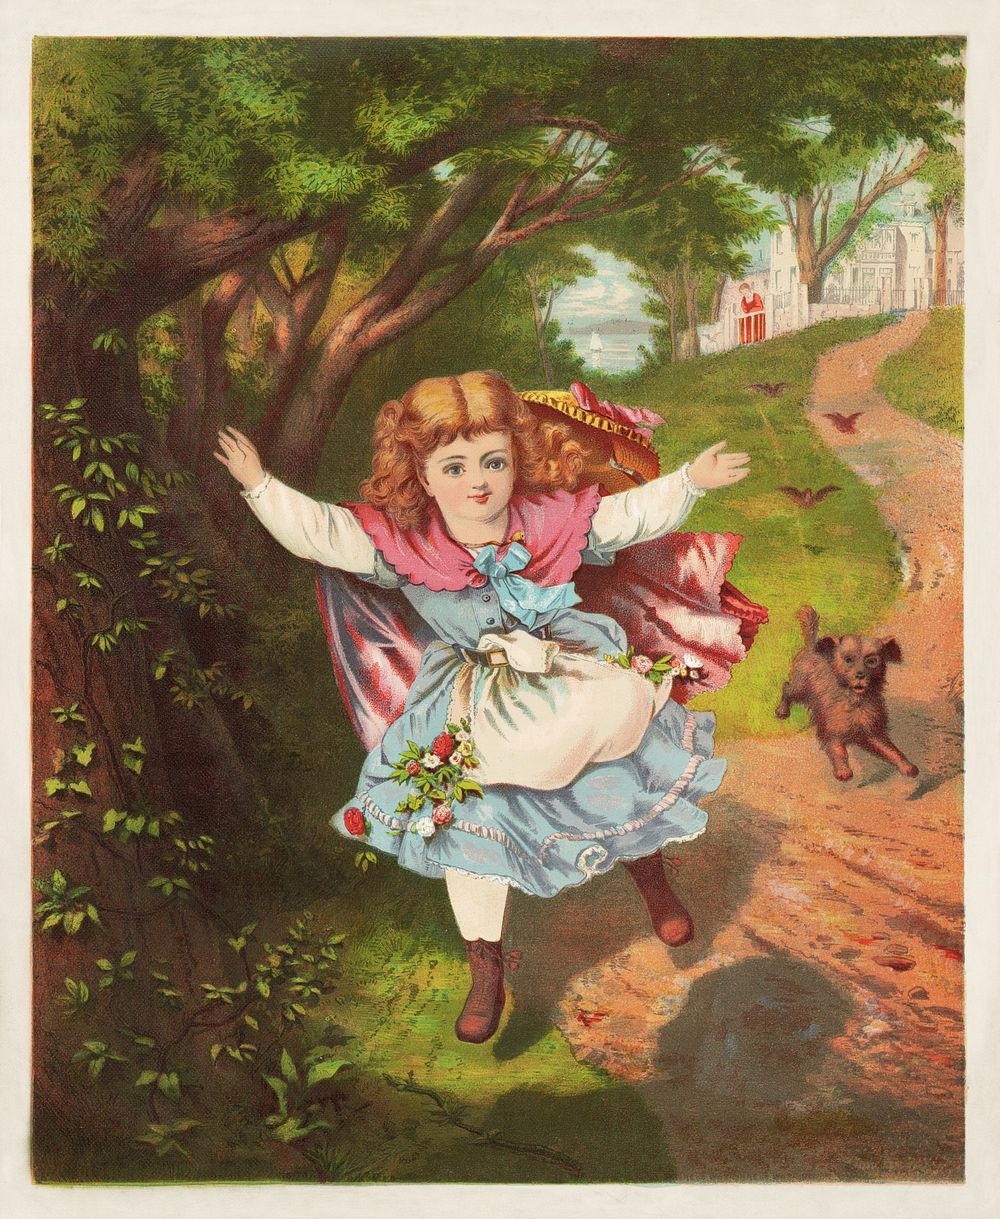 Papa's coming (1874).  Original public domain image from the Library of Congress. Digitally enhanced by rawpixel.